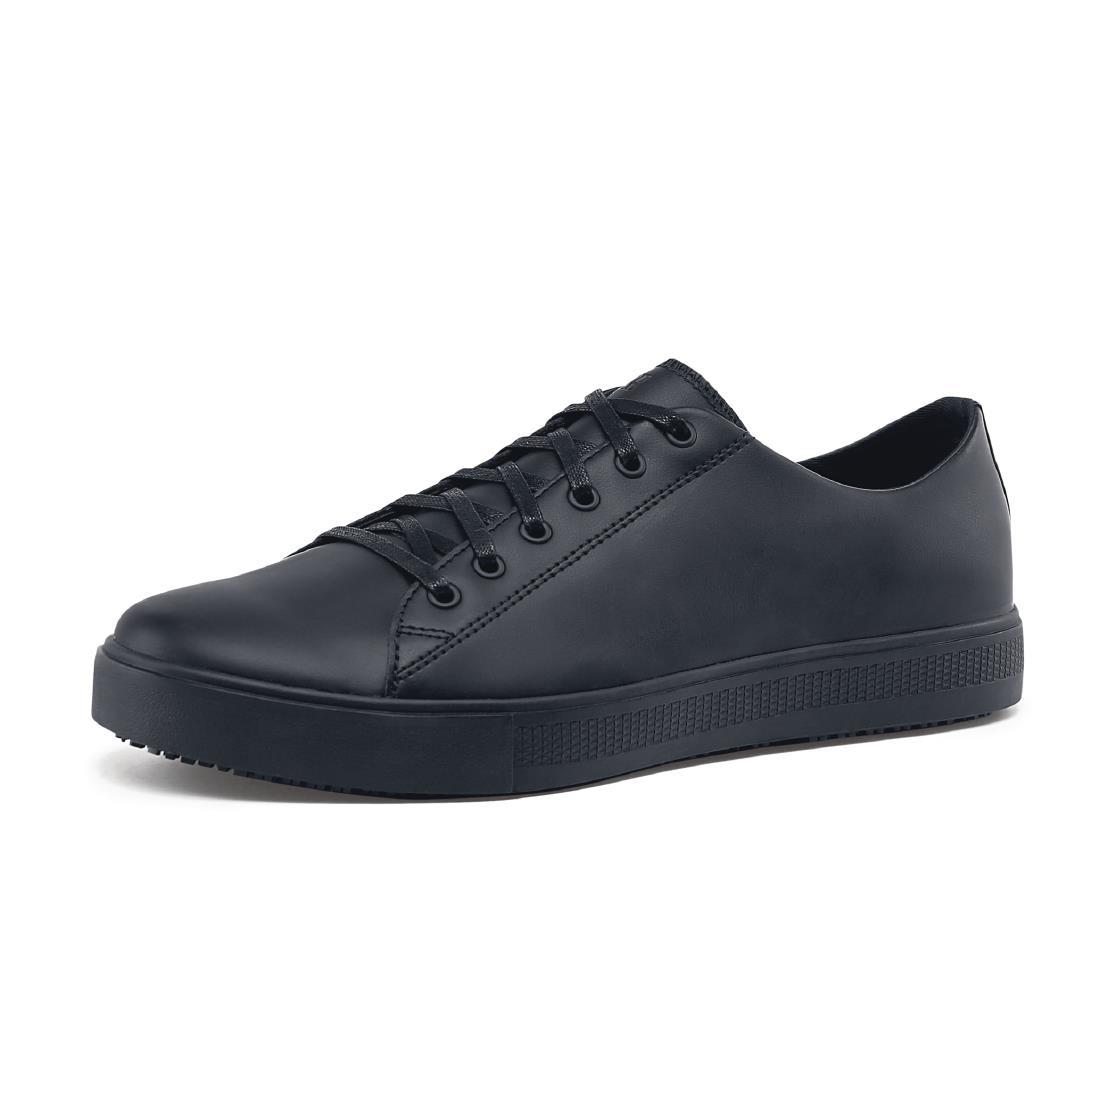 Shoes for Crews Old School Trainers Black 43 - BB161-43  - 6